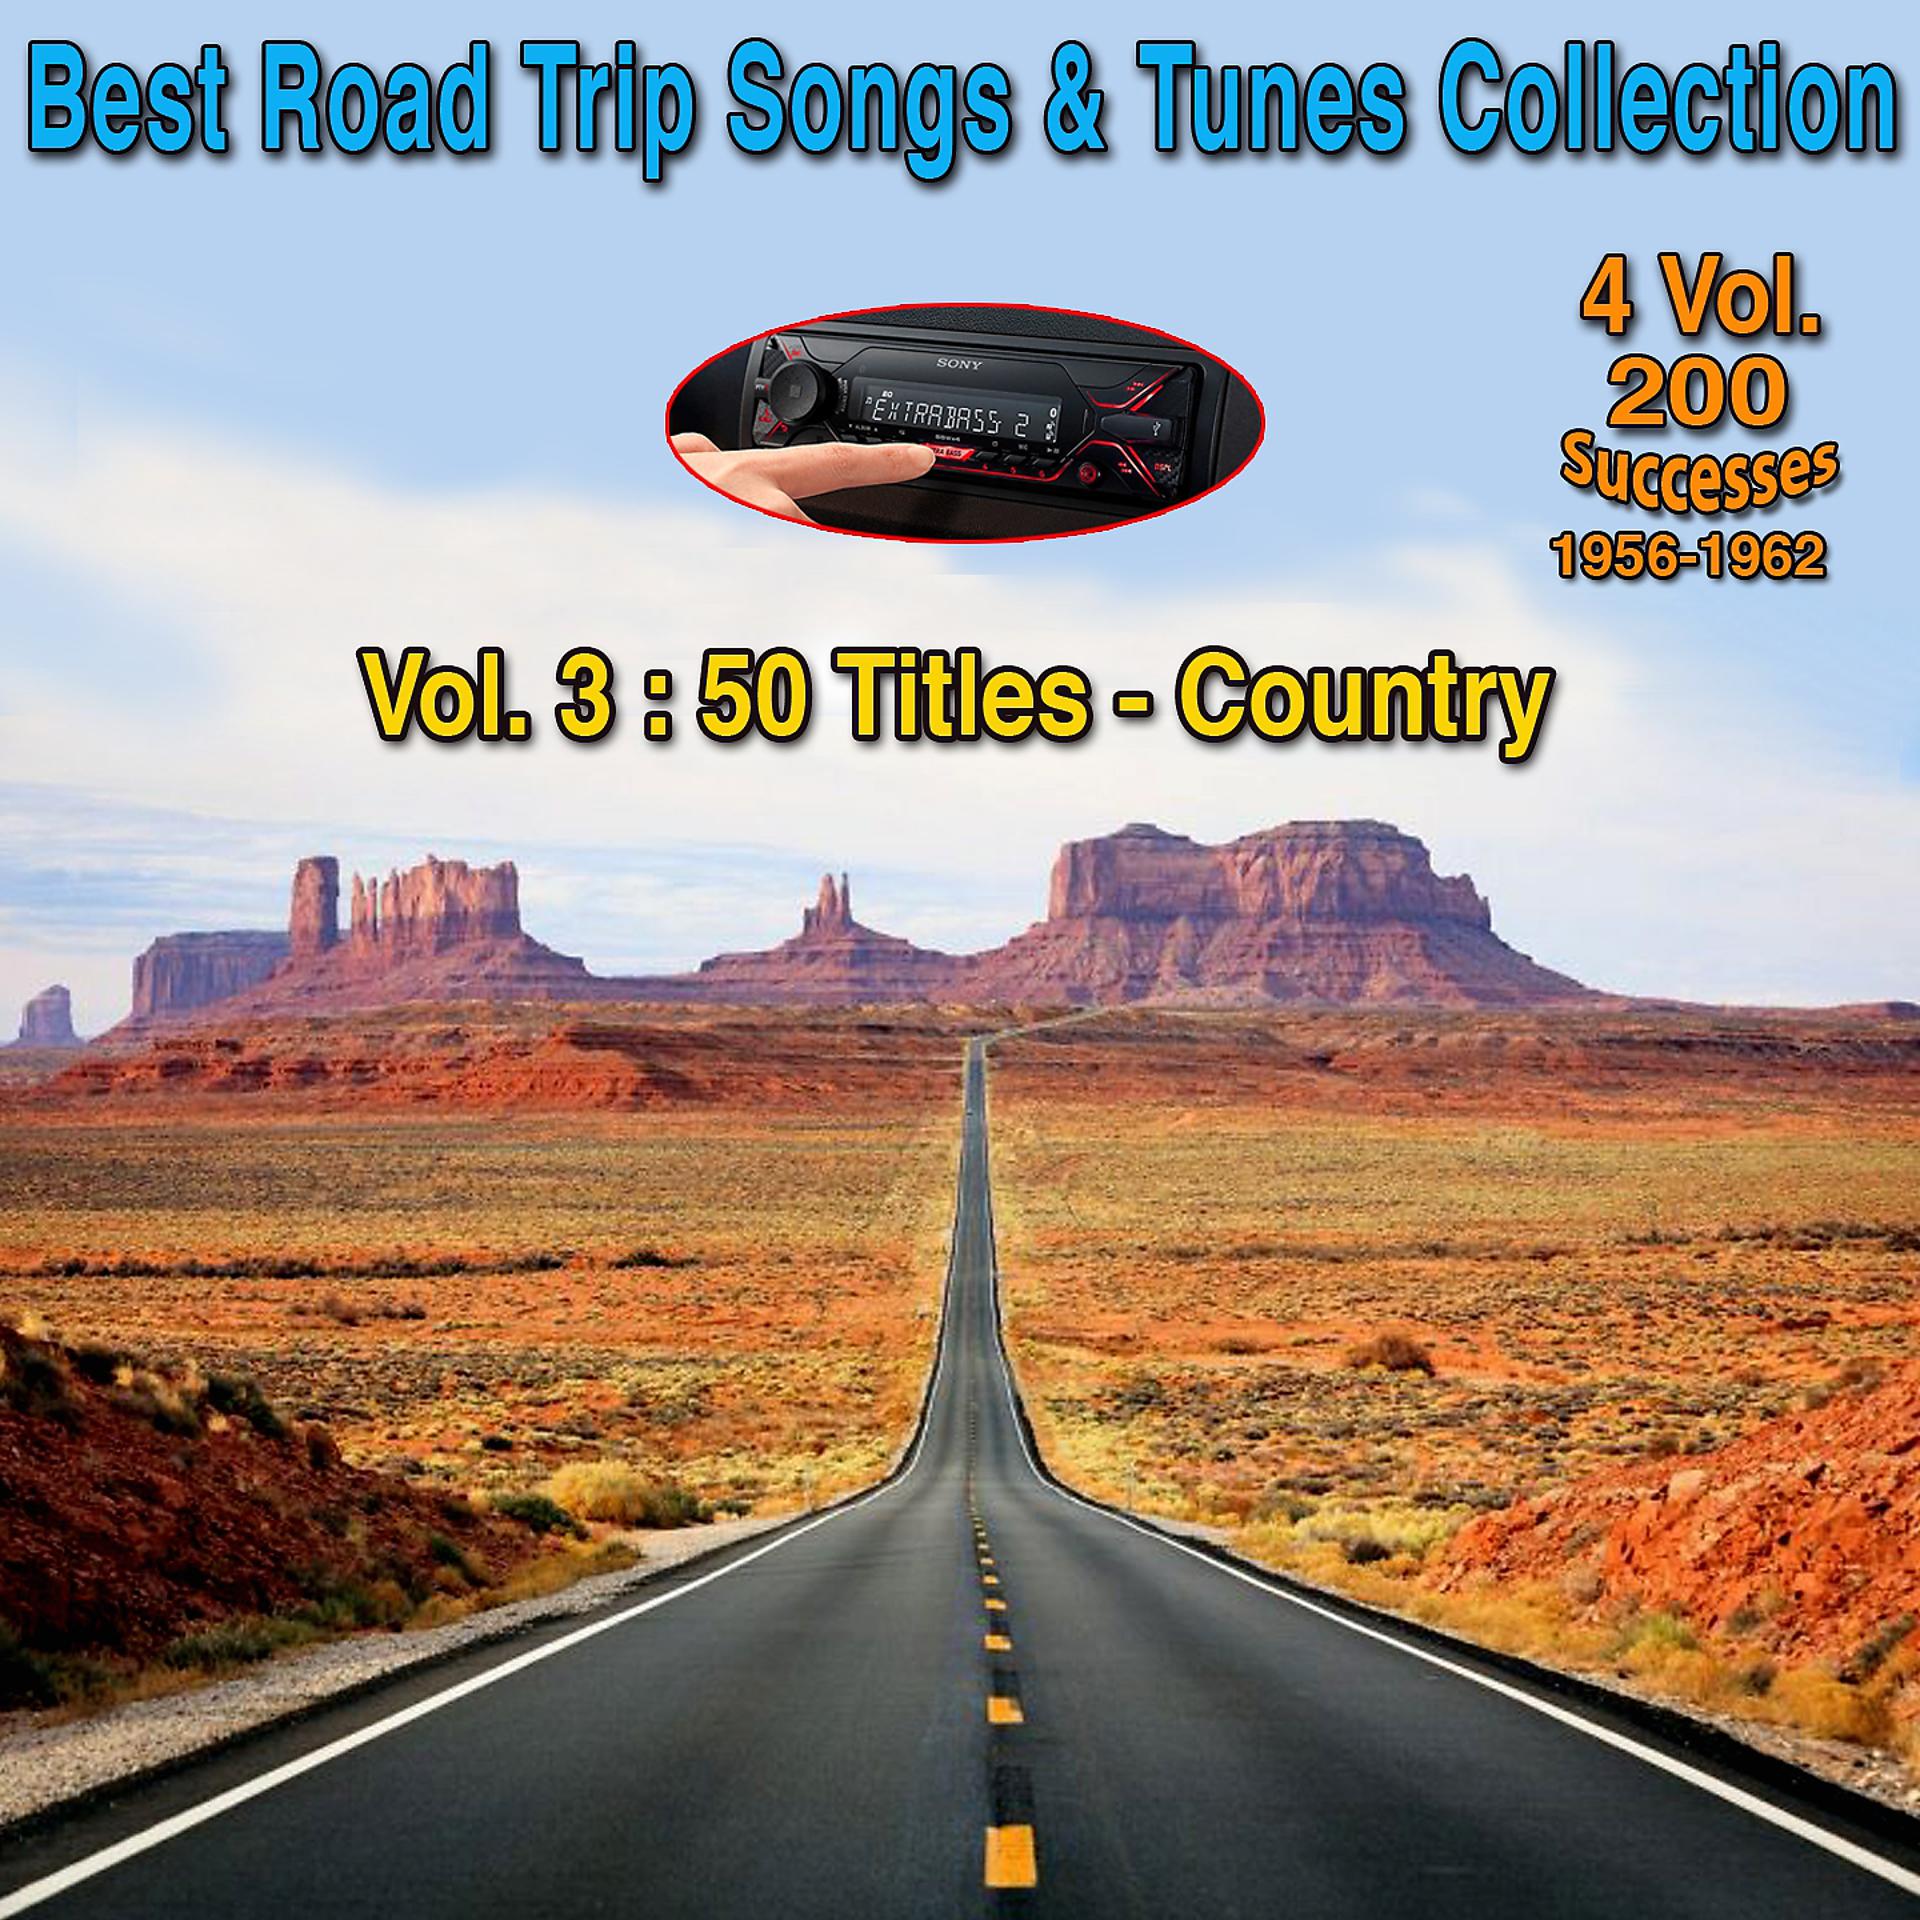 Постер альбома Best Road Trip Songs & Tunes Collection - 4 Vol 200 Successes 1956-1962